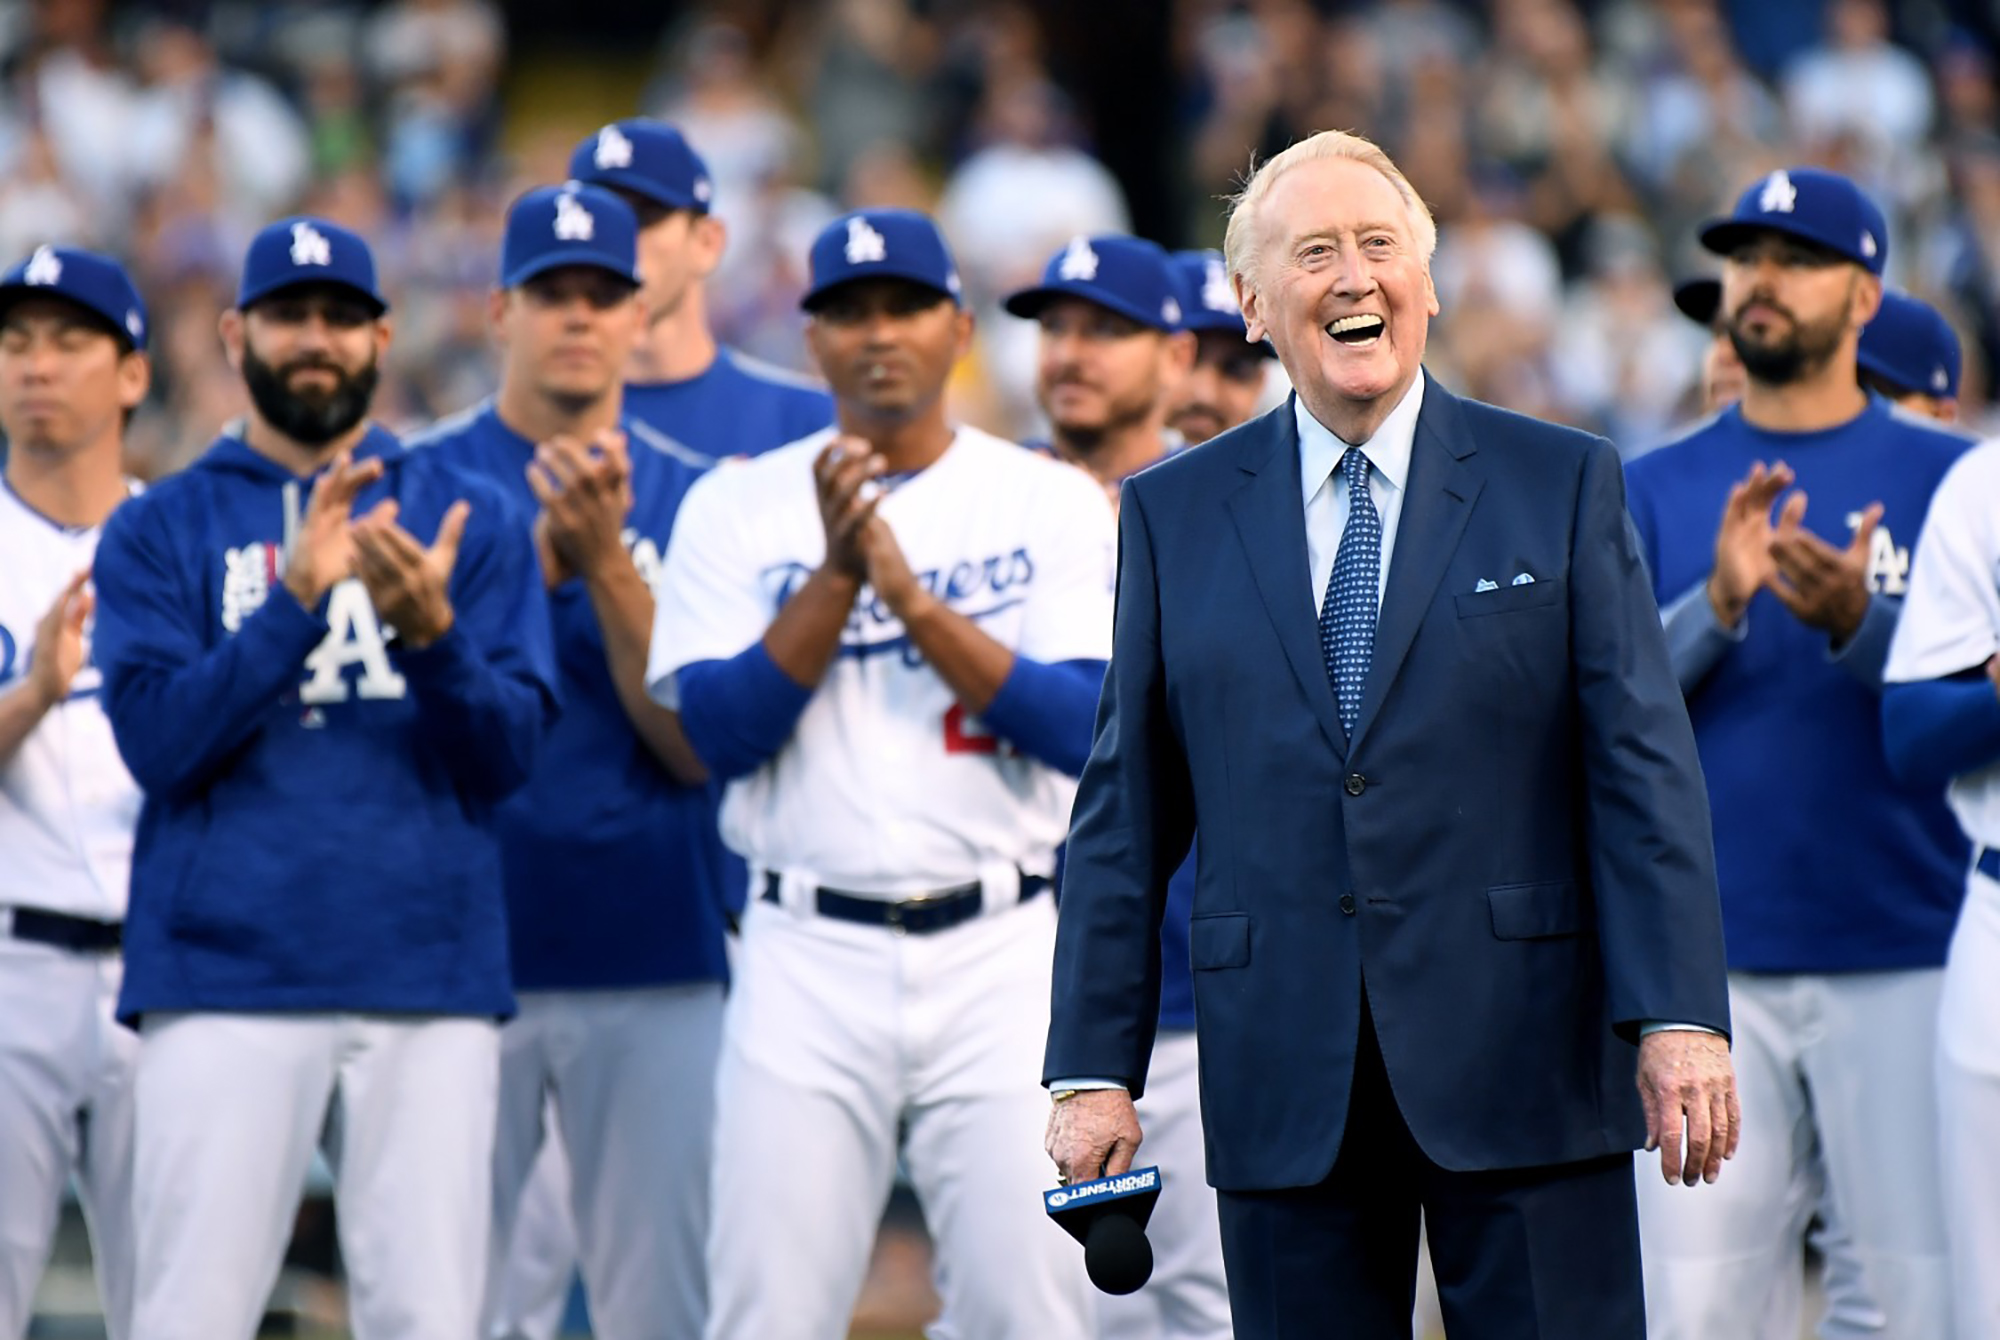 Vin Scully, Los Angeles Dodgers broadcaster for 67 years, dies aged 94, MLB